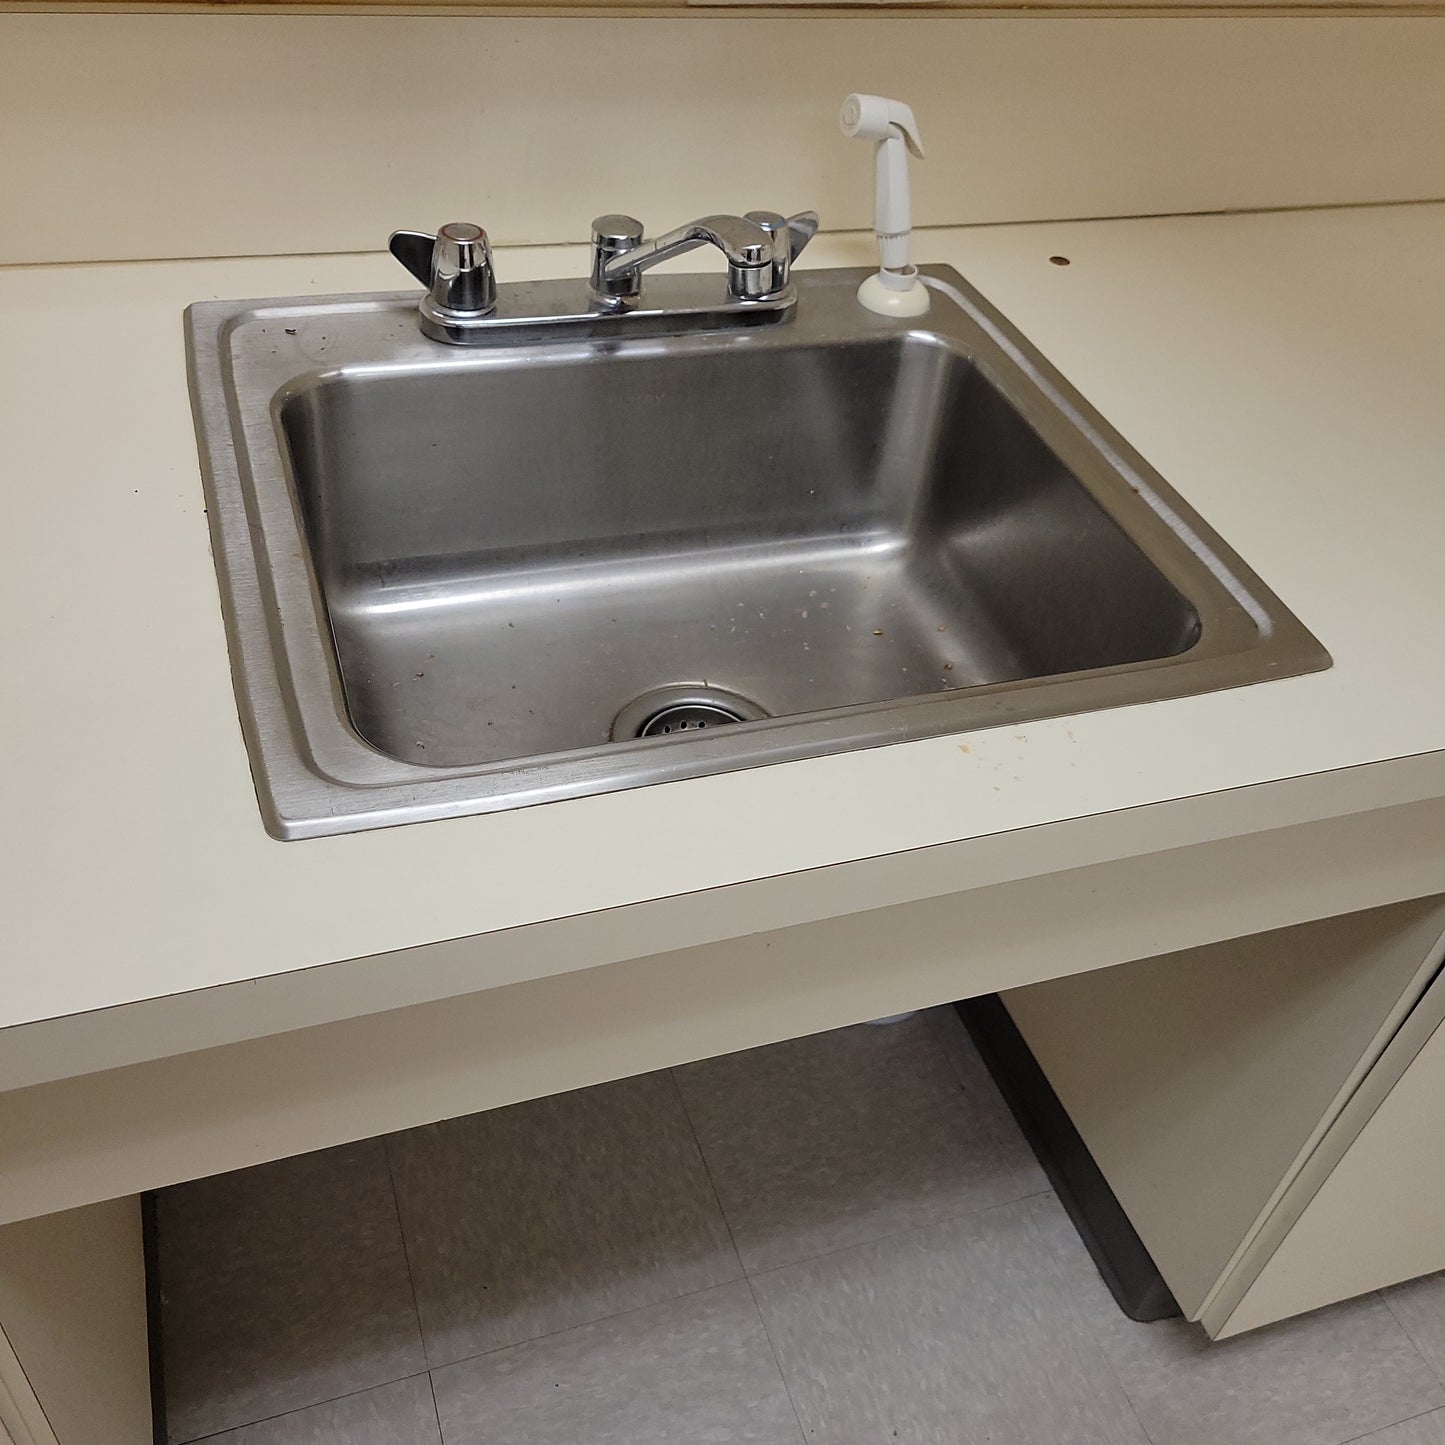 Storage cabinet countertop with sink